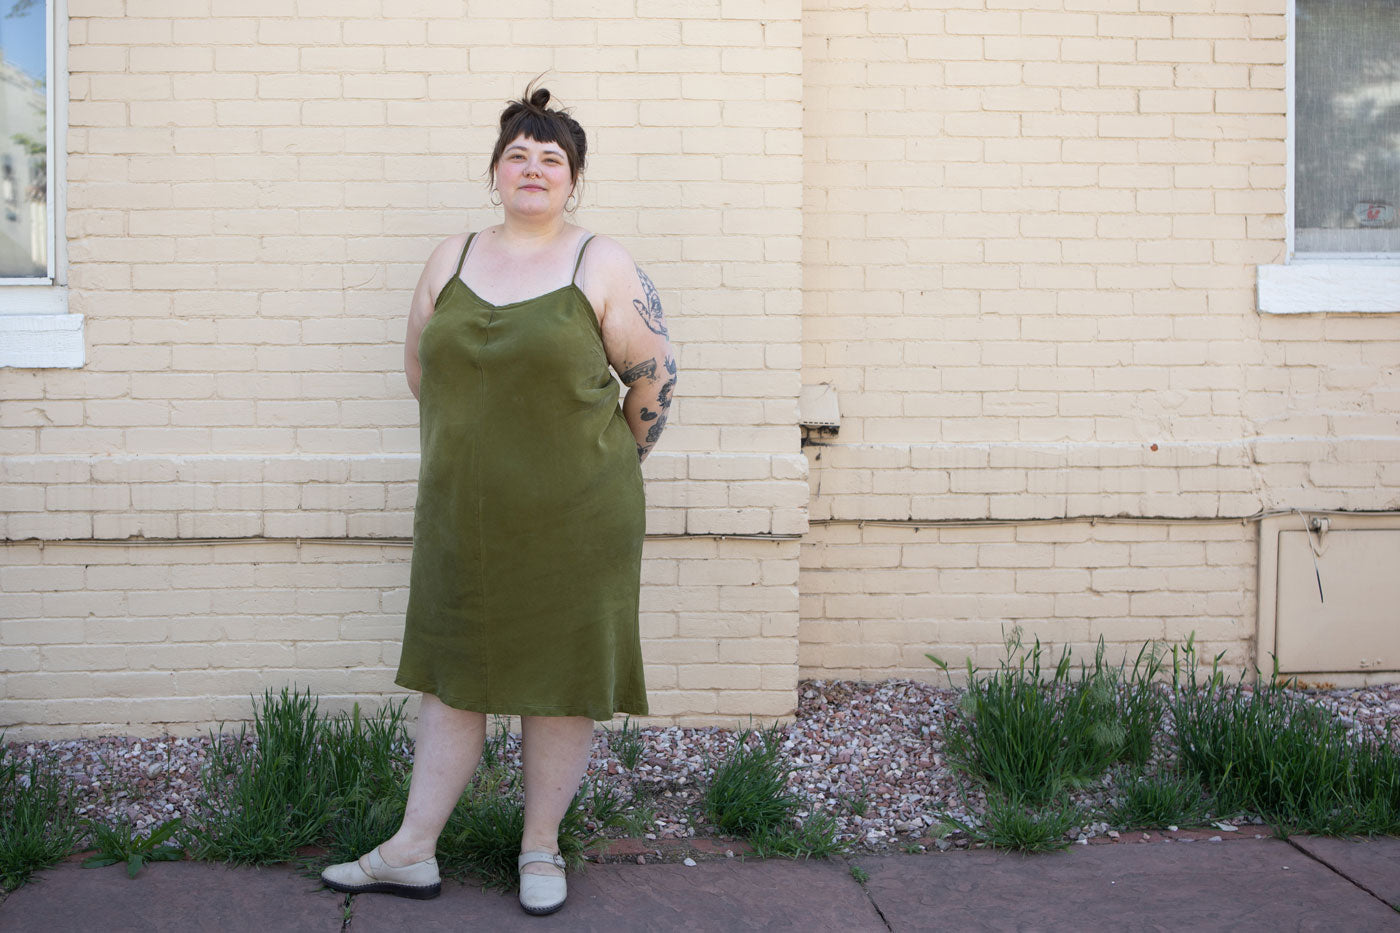 Marta stands in front of a light yellow brick wall wearing her Saltwater Slip dress in the color moss. Her hair is up in a a bun.